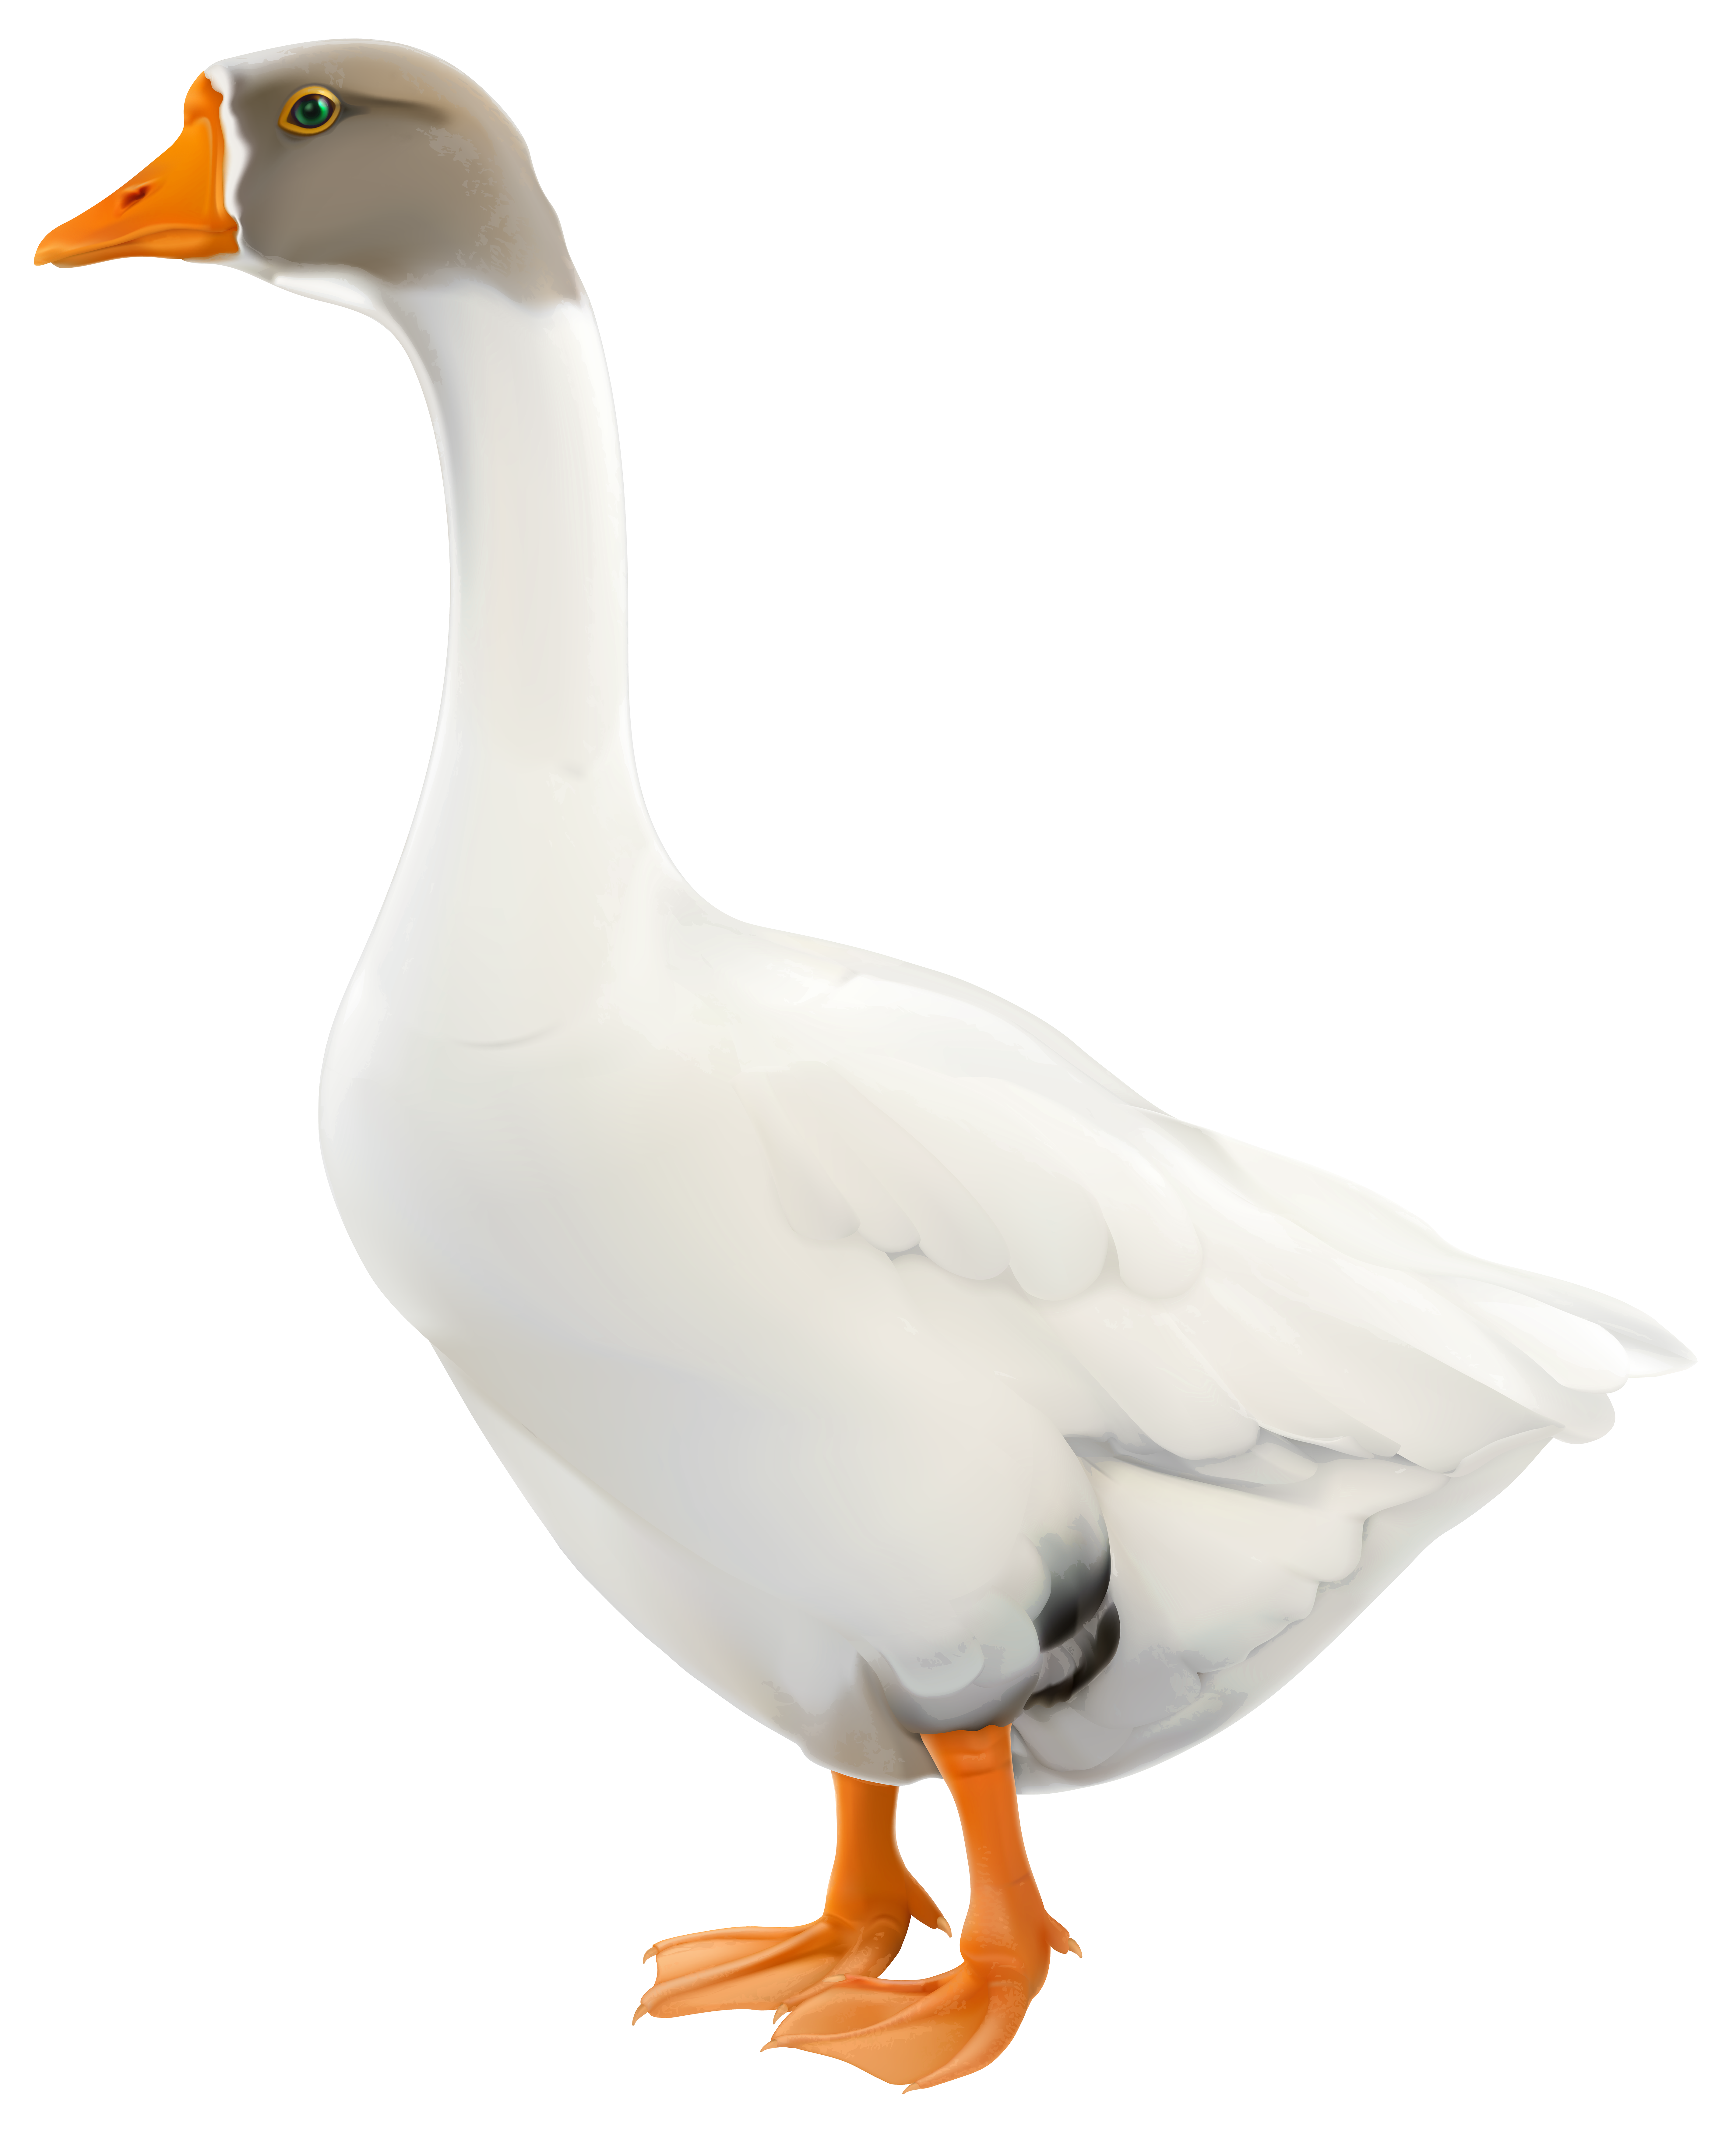 goose clipart space